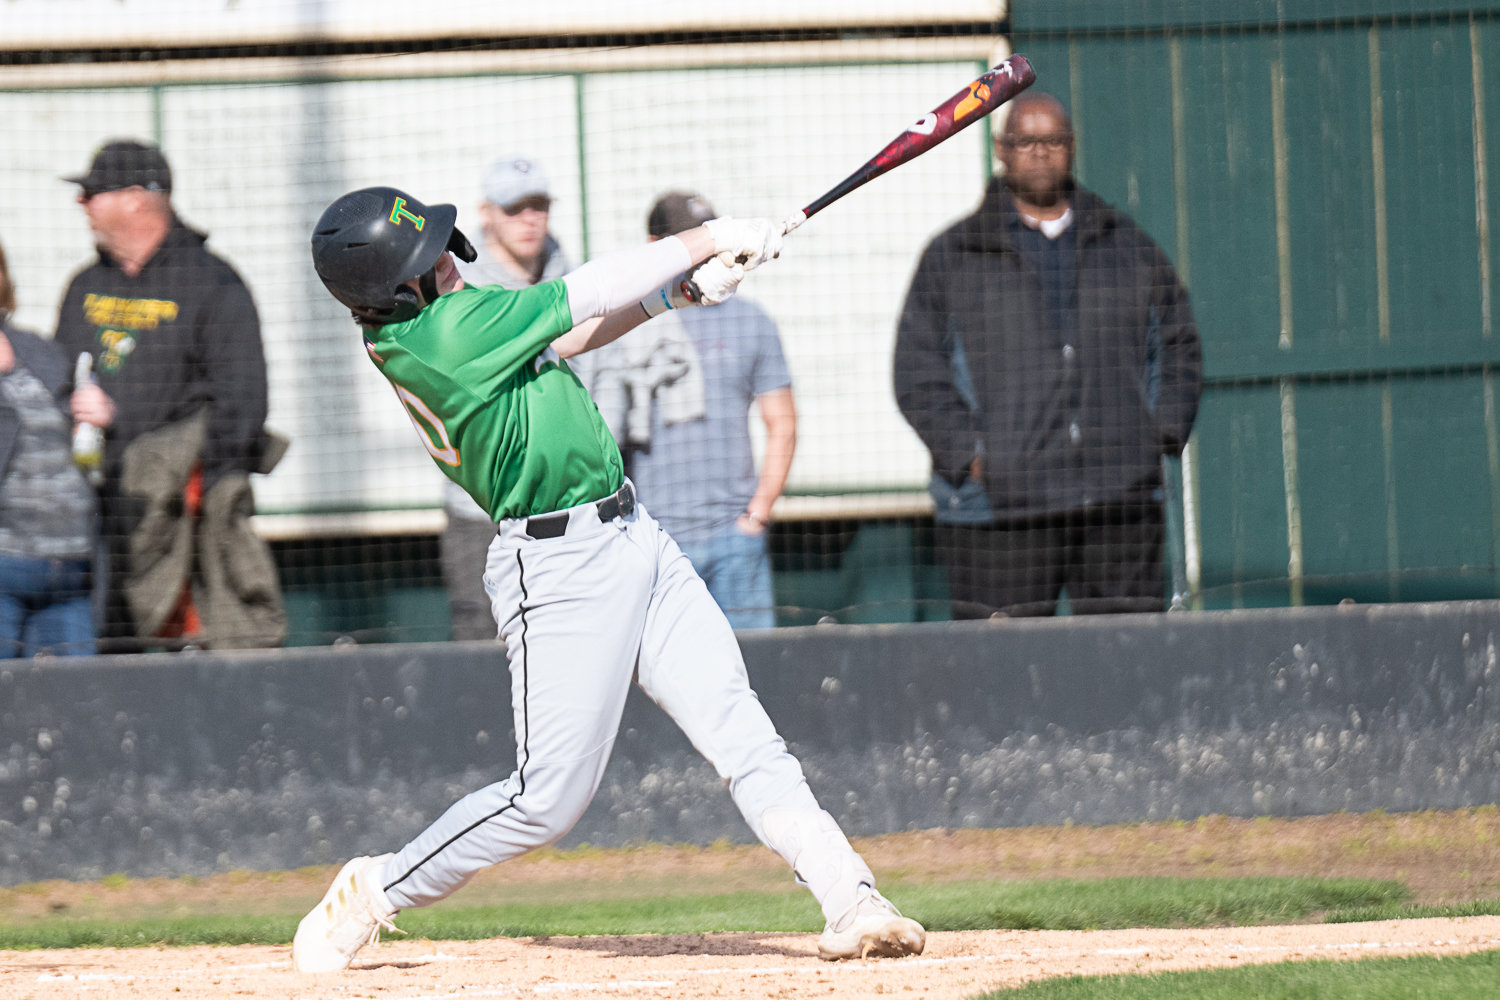 Derek Thompson brings two runs home on a double in the first inning of Tumwater's 10-0 win over Centralia on March 29.